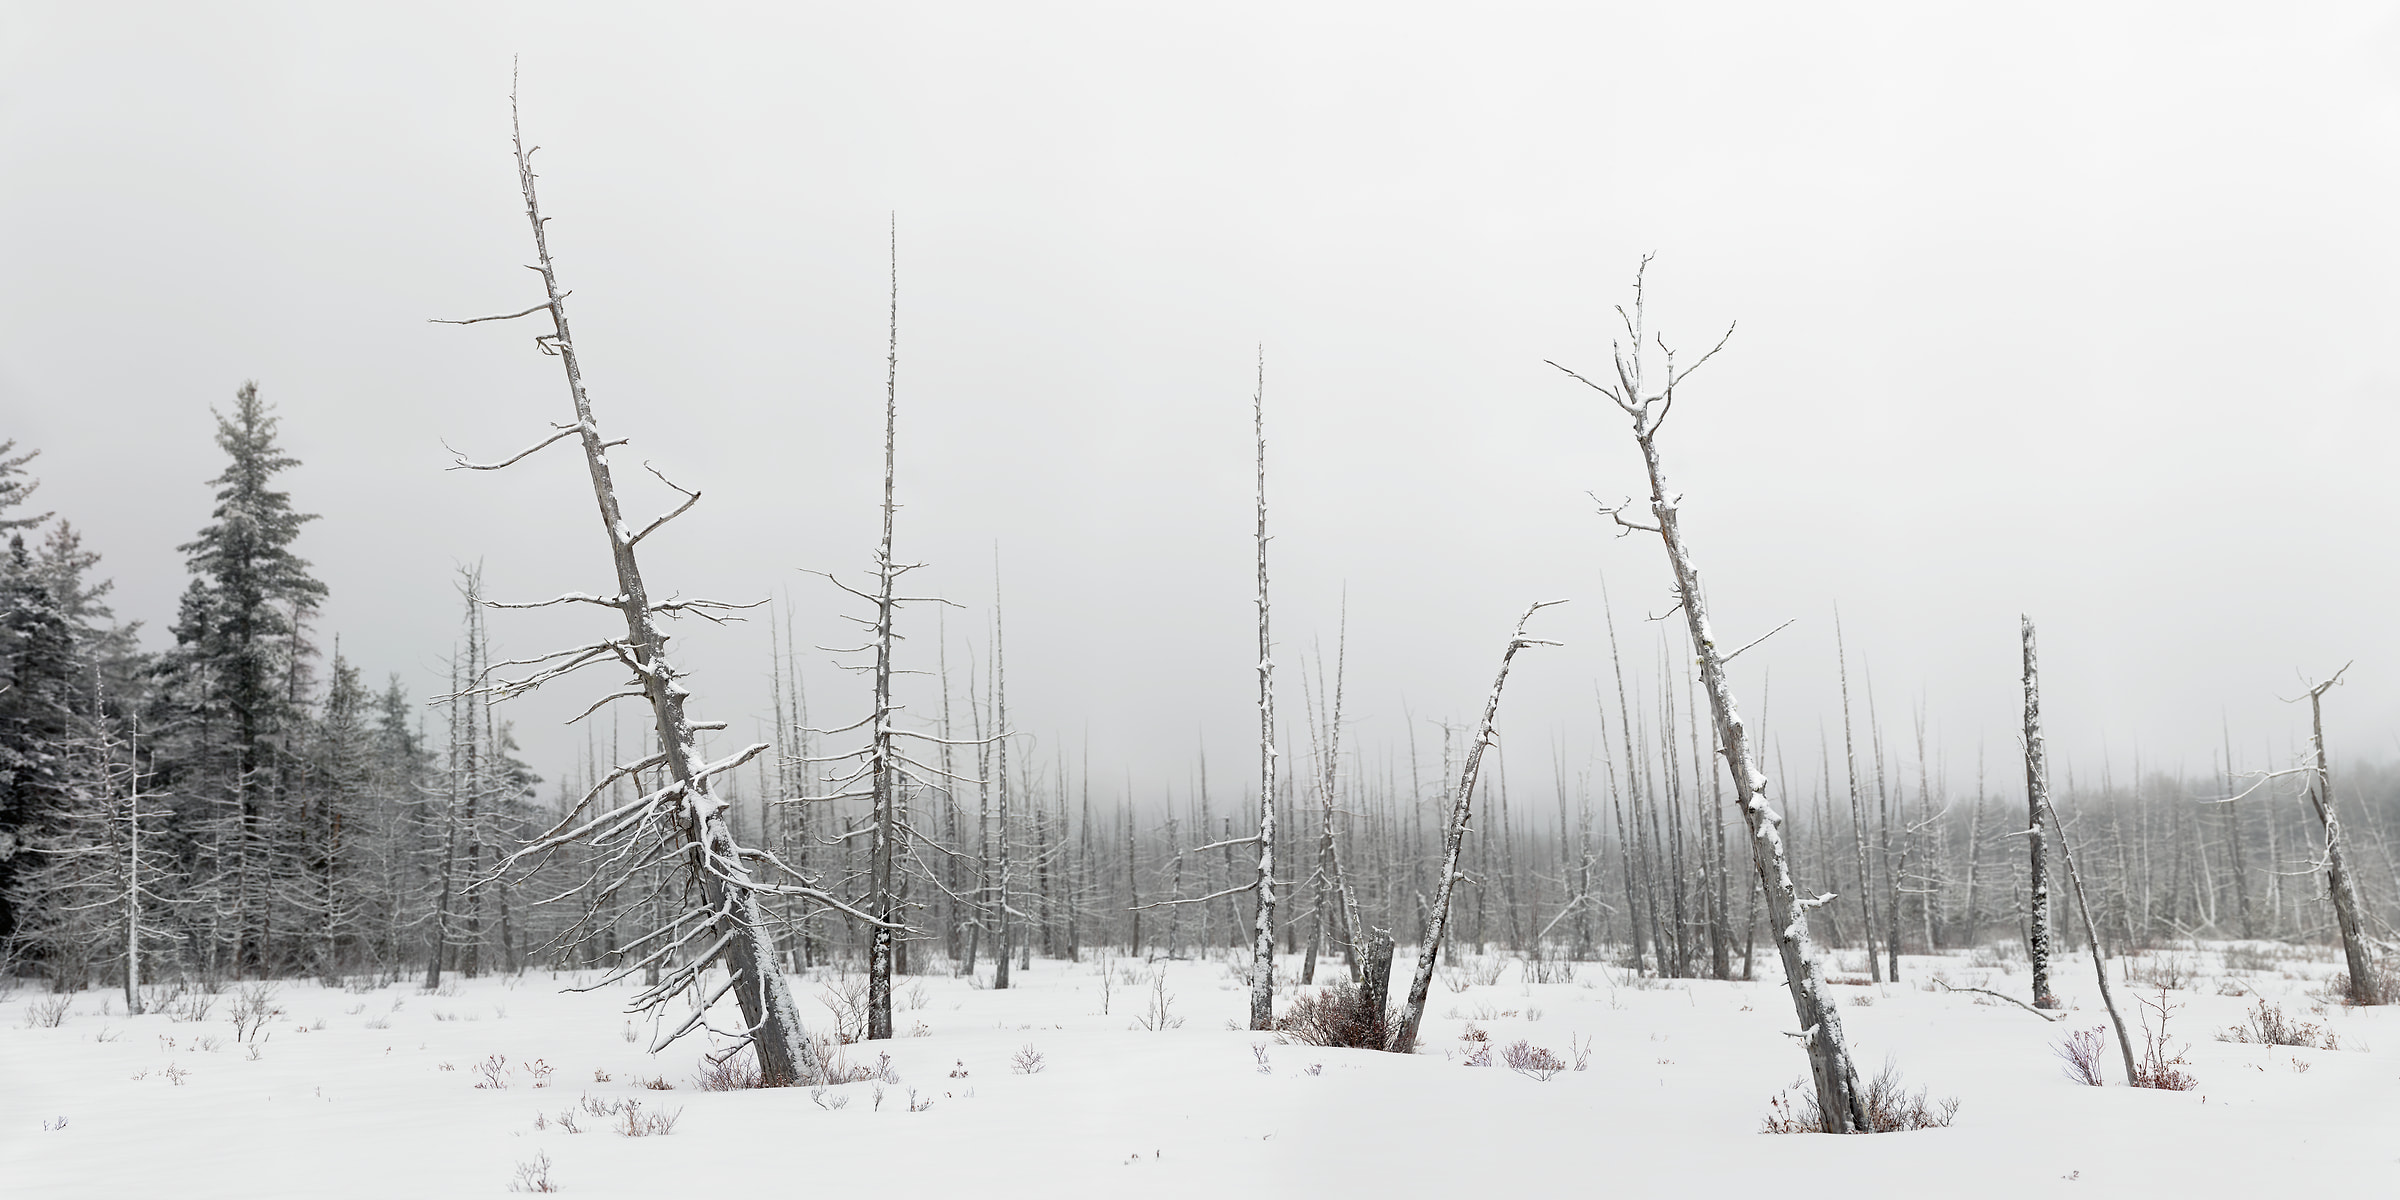 1,242 megapixels! A very high resolution, large-format photo print of a winter forest scene with barren trees; fine art nature photograph created by Aaron Priest on Golden Road in Millinocket, Maine